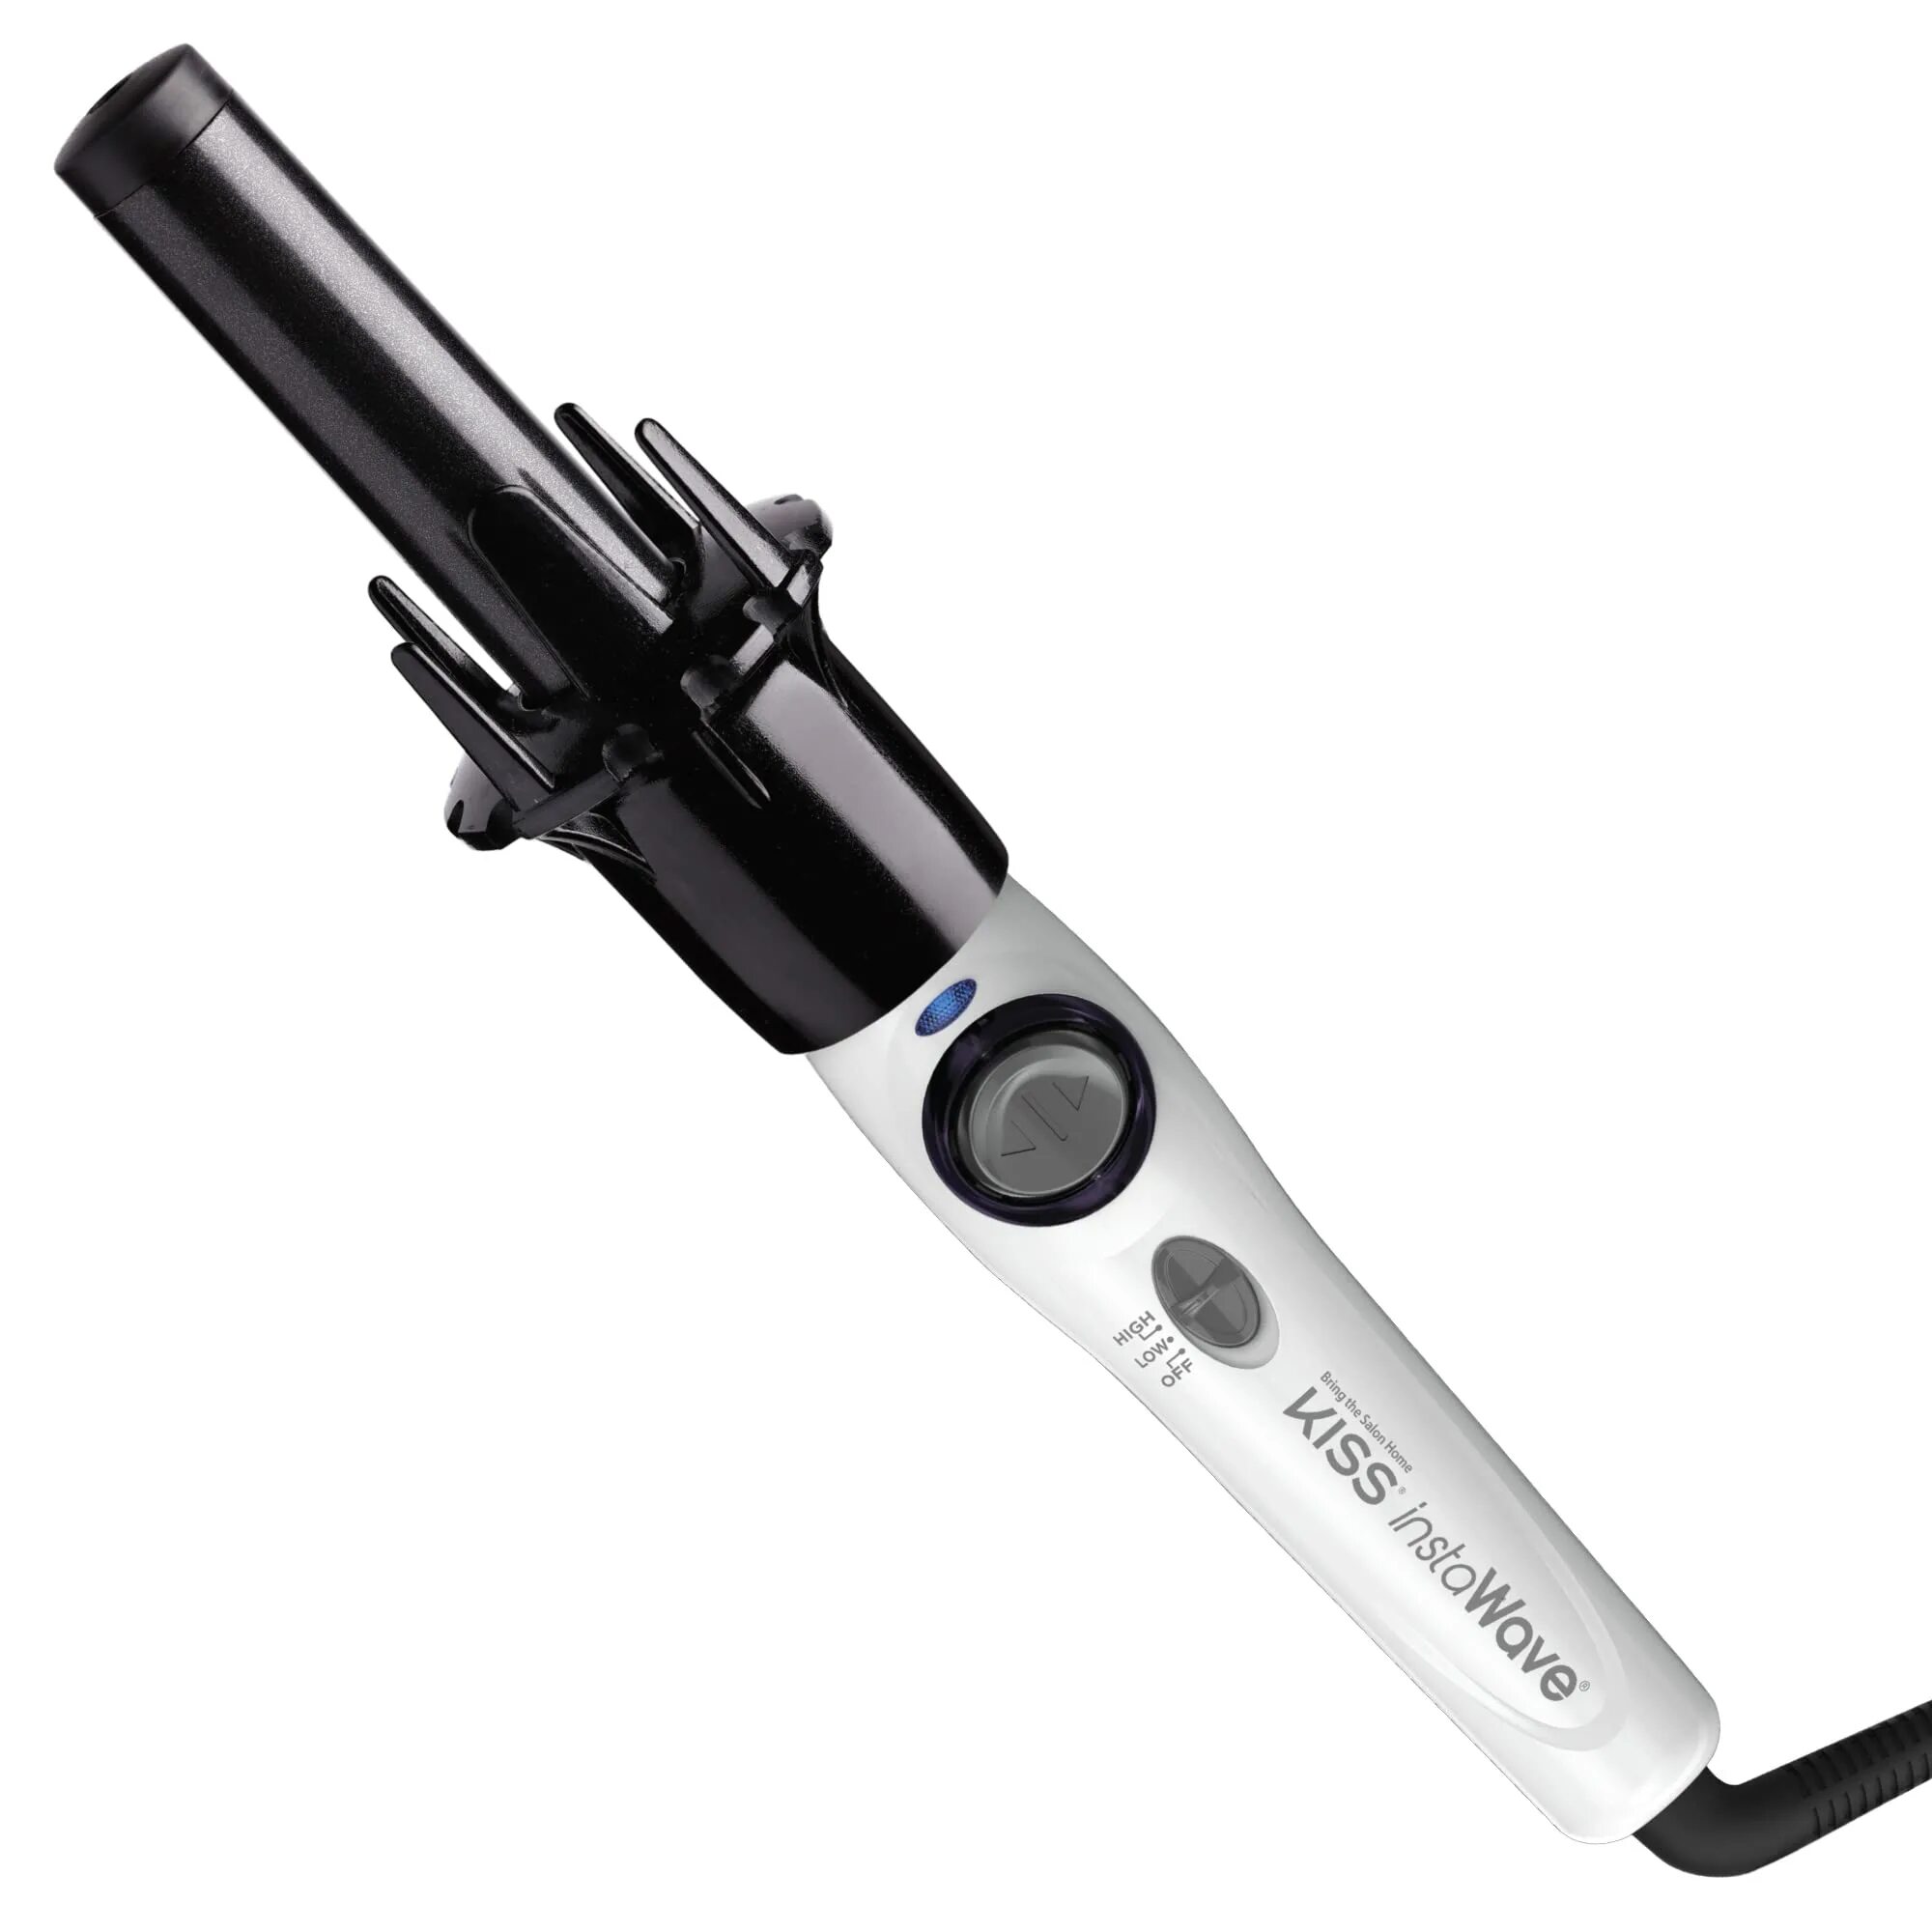 Automatic curler. Automatic hair Curling Iron. Curling Iron. Kiss Curl hair.